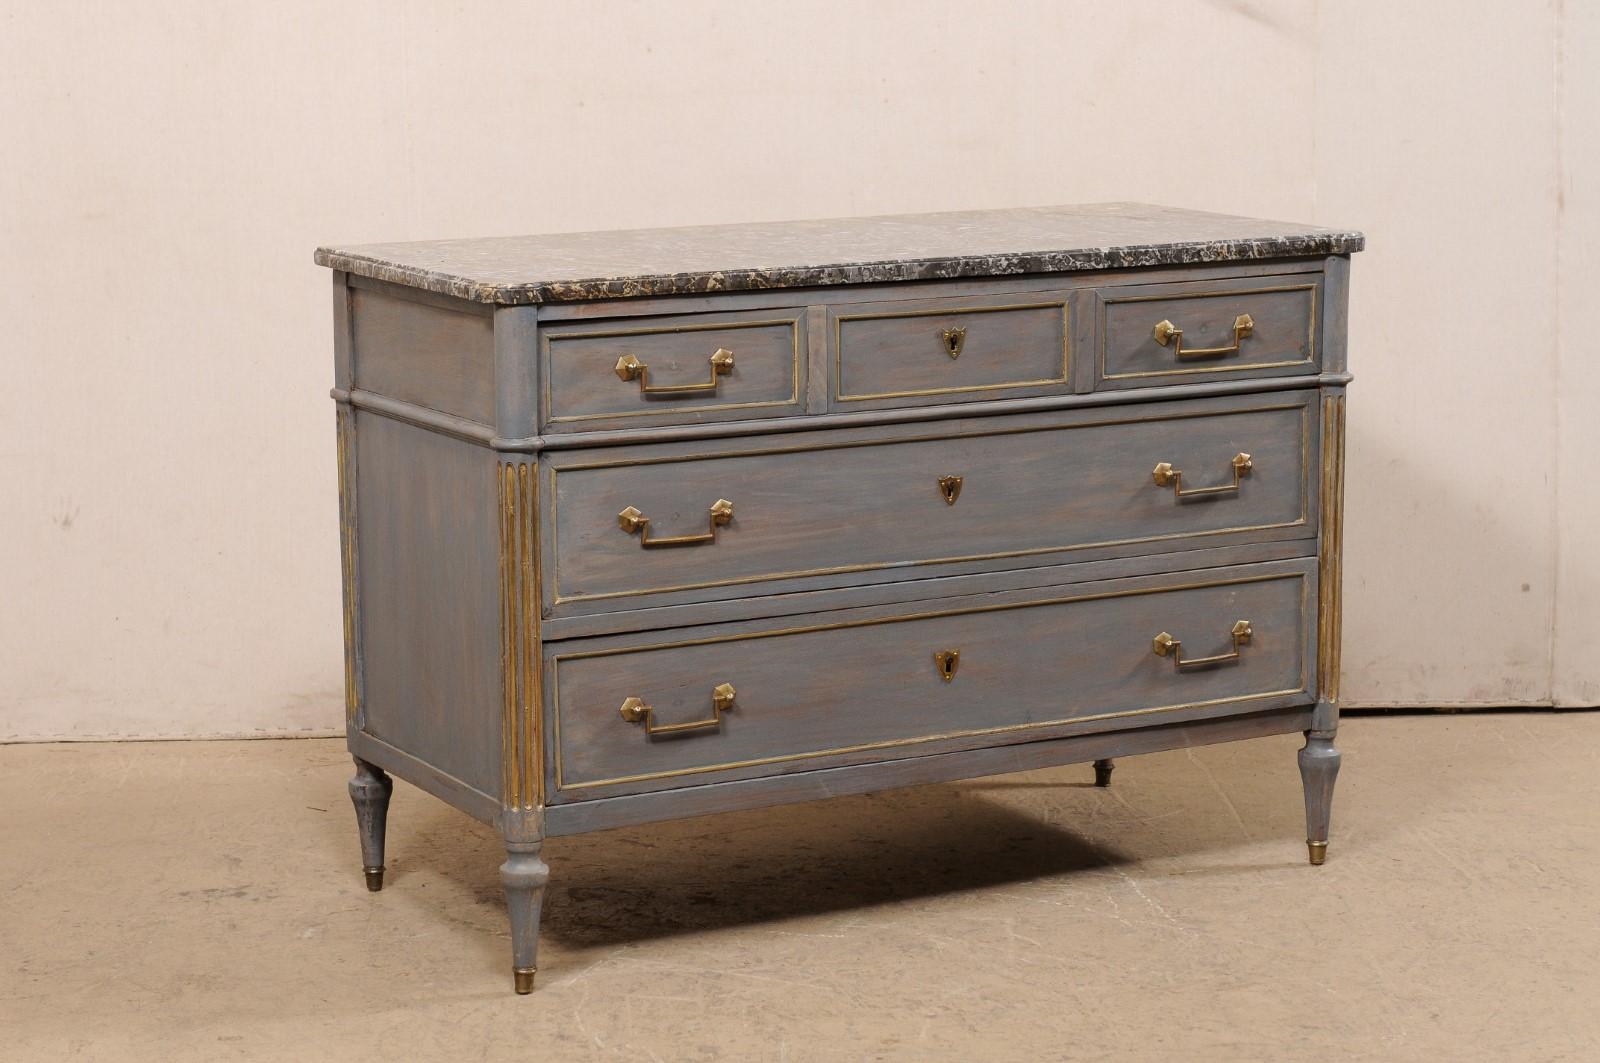 A French Neoclassical commode with its original marble top from the 19th century. This antique chest from France features a rectangular-shaped marble top, with pronounced rounded front corners, which rests atop a neoclassical case with rounded and